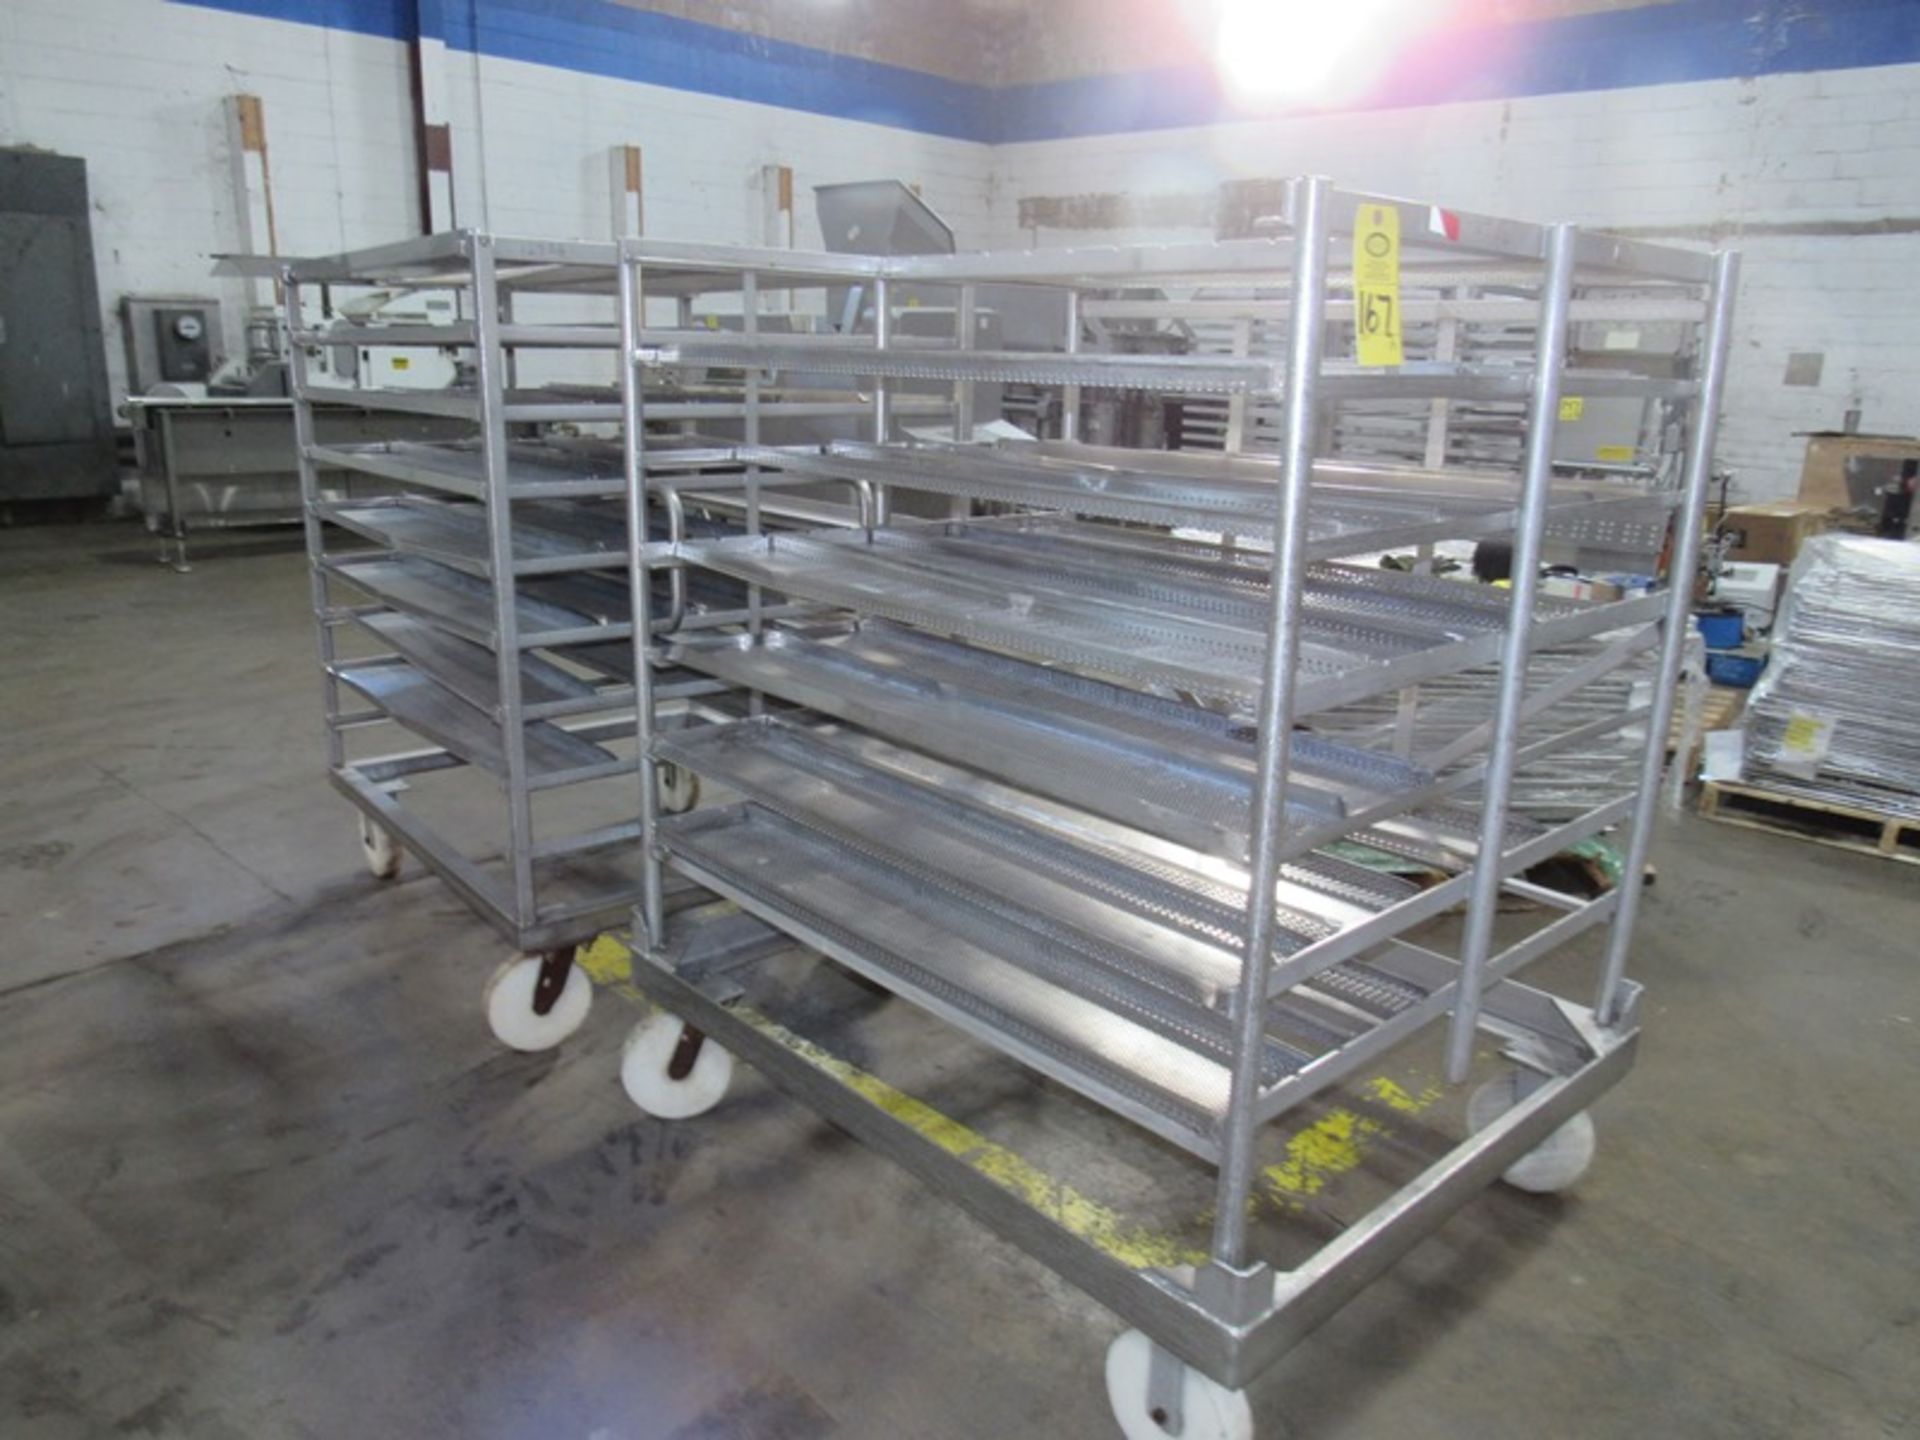 Stainless Steel Smoke Trucks, 42" W X 49" L X 5' T, 7 spaces, 6" apart, with 8" W X 48" L perforated